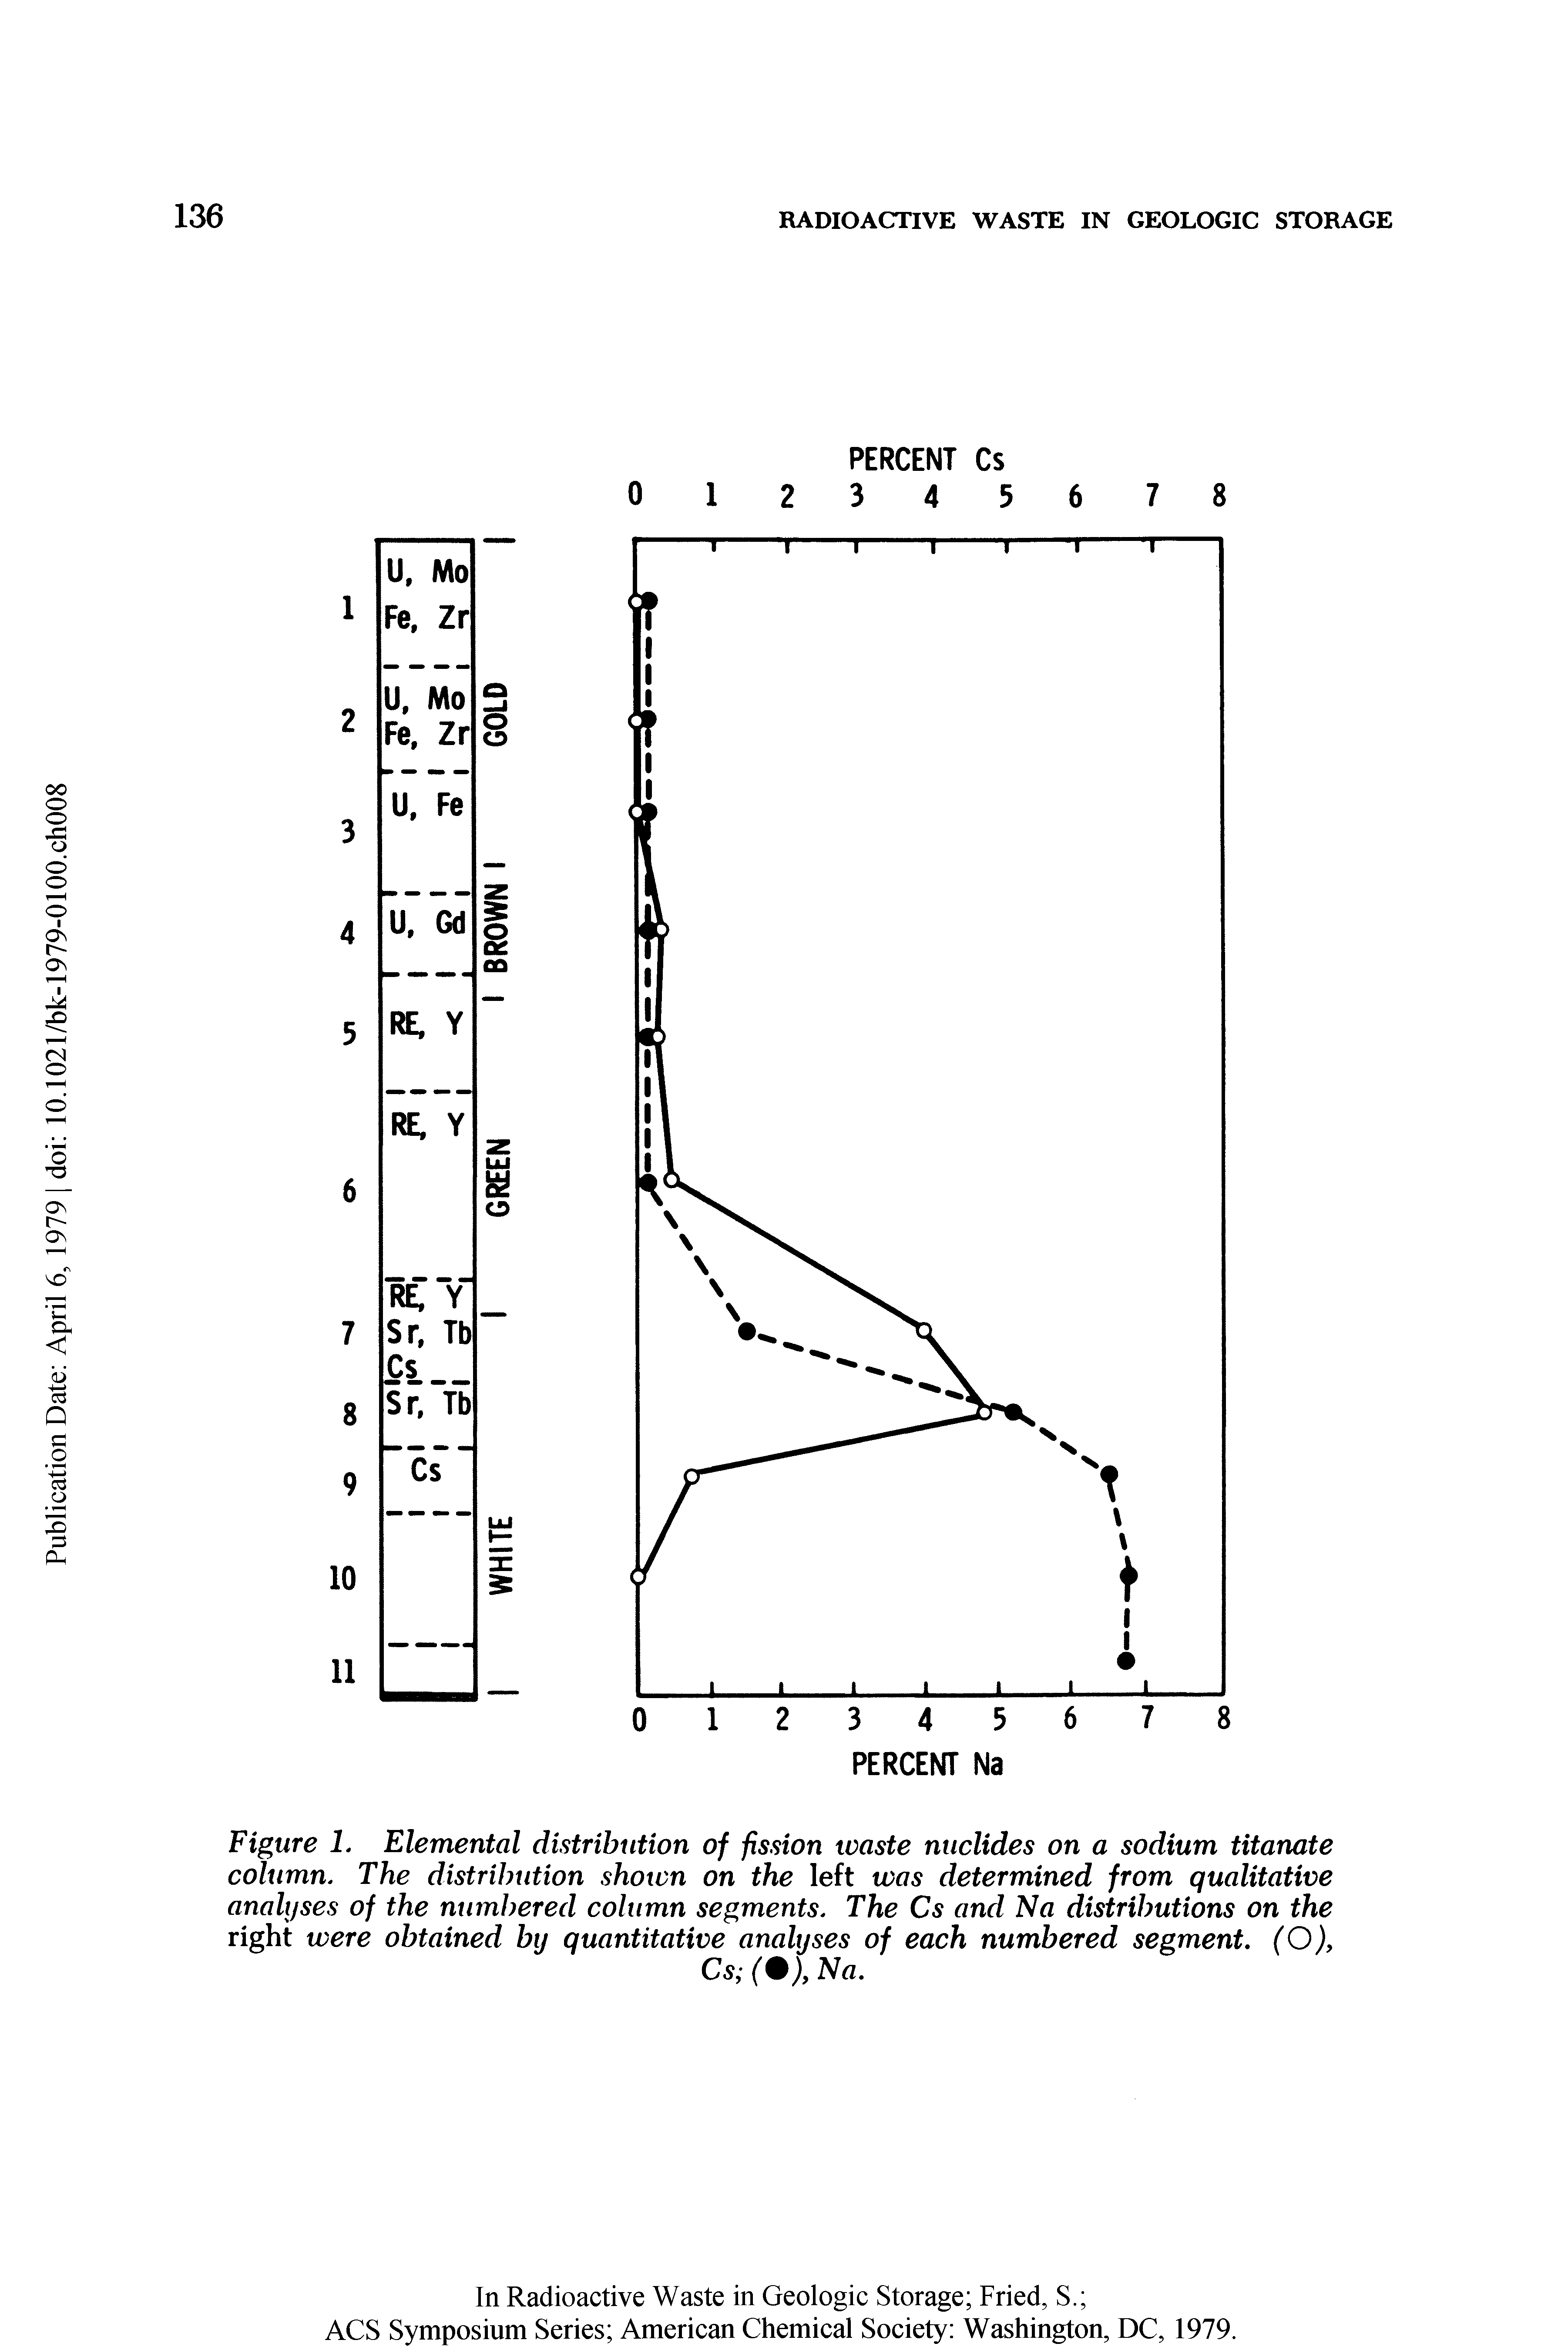 Figure 1. Elemental distribution of fission waste nuclides on a sodium titanate column. The distribution shown on the left was determined from qualitative analyses of the numbered column segments. The Cs and Na distributions on the right were obtained by quantitative analyses of each numbered segment. (O), Cs ( ), Na.